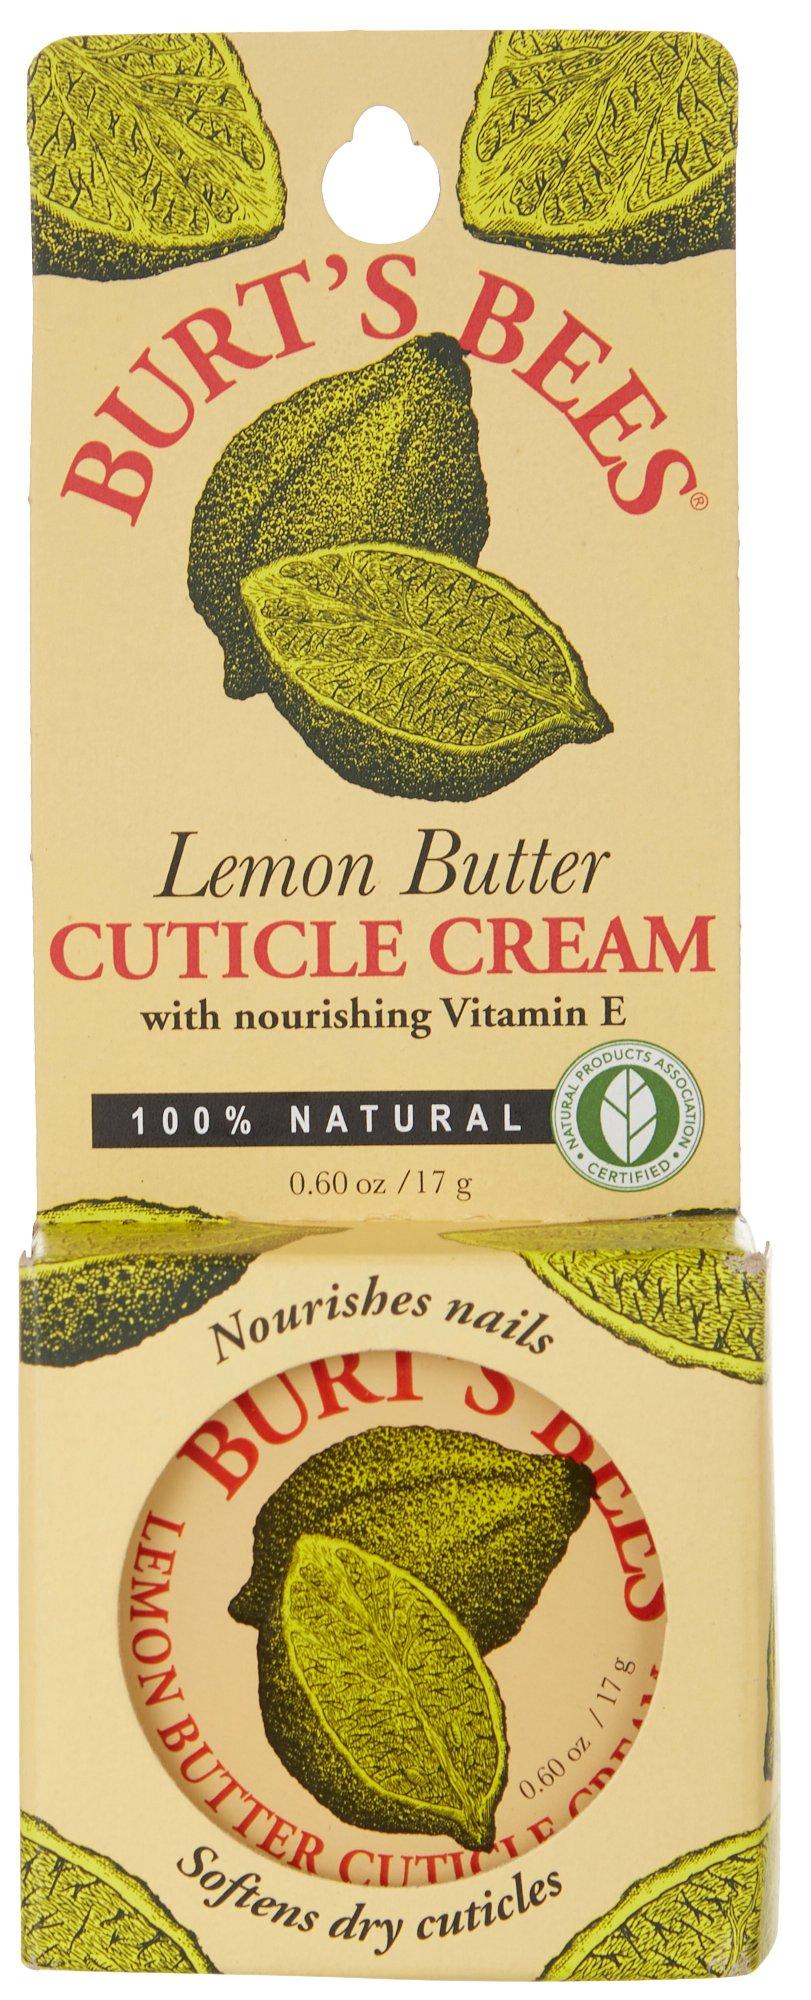 Burt's Bees Lemon Butter Cuticle Cream For Nails